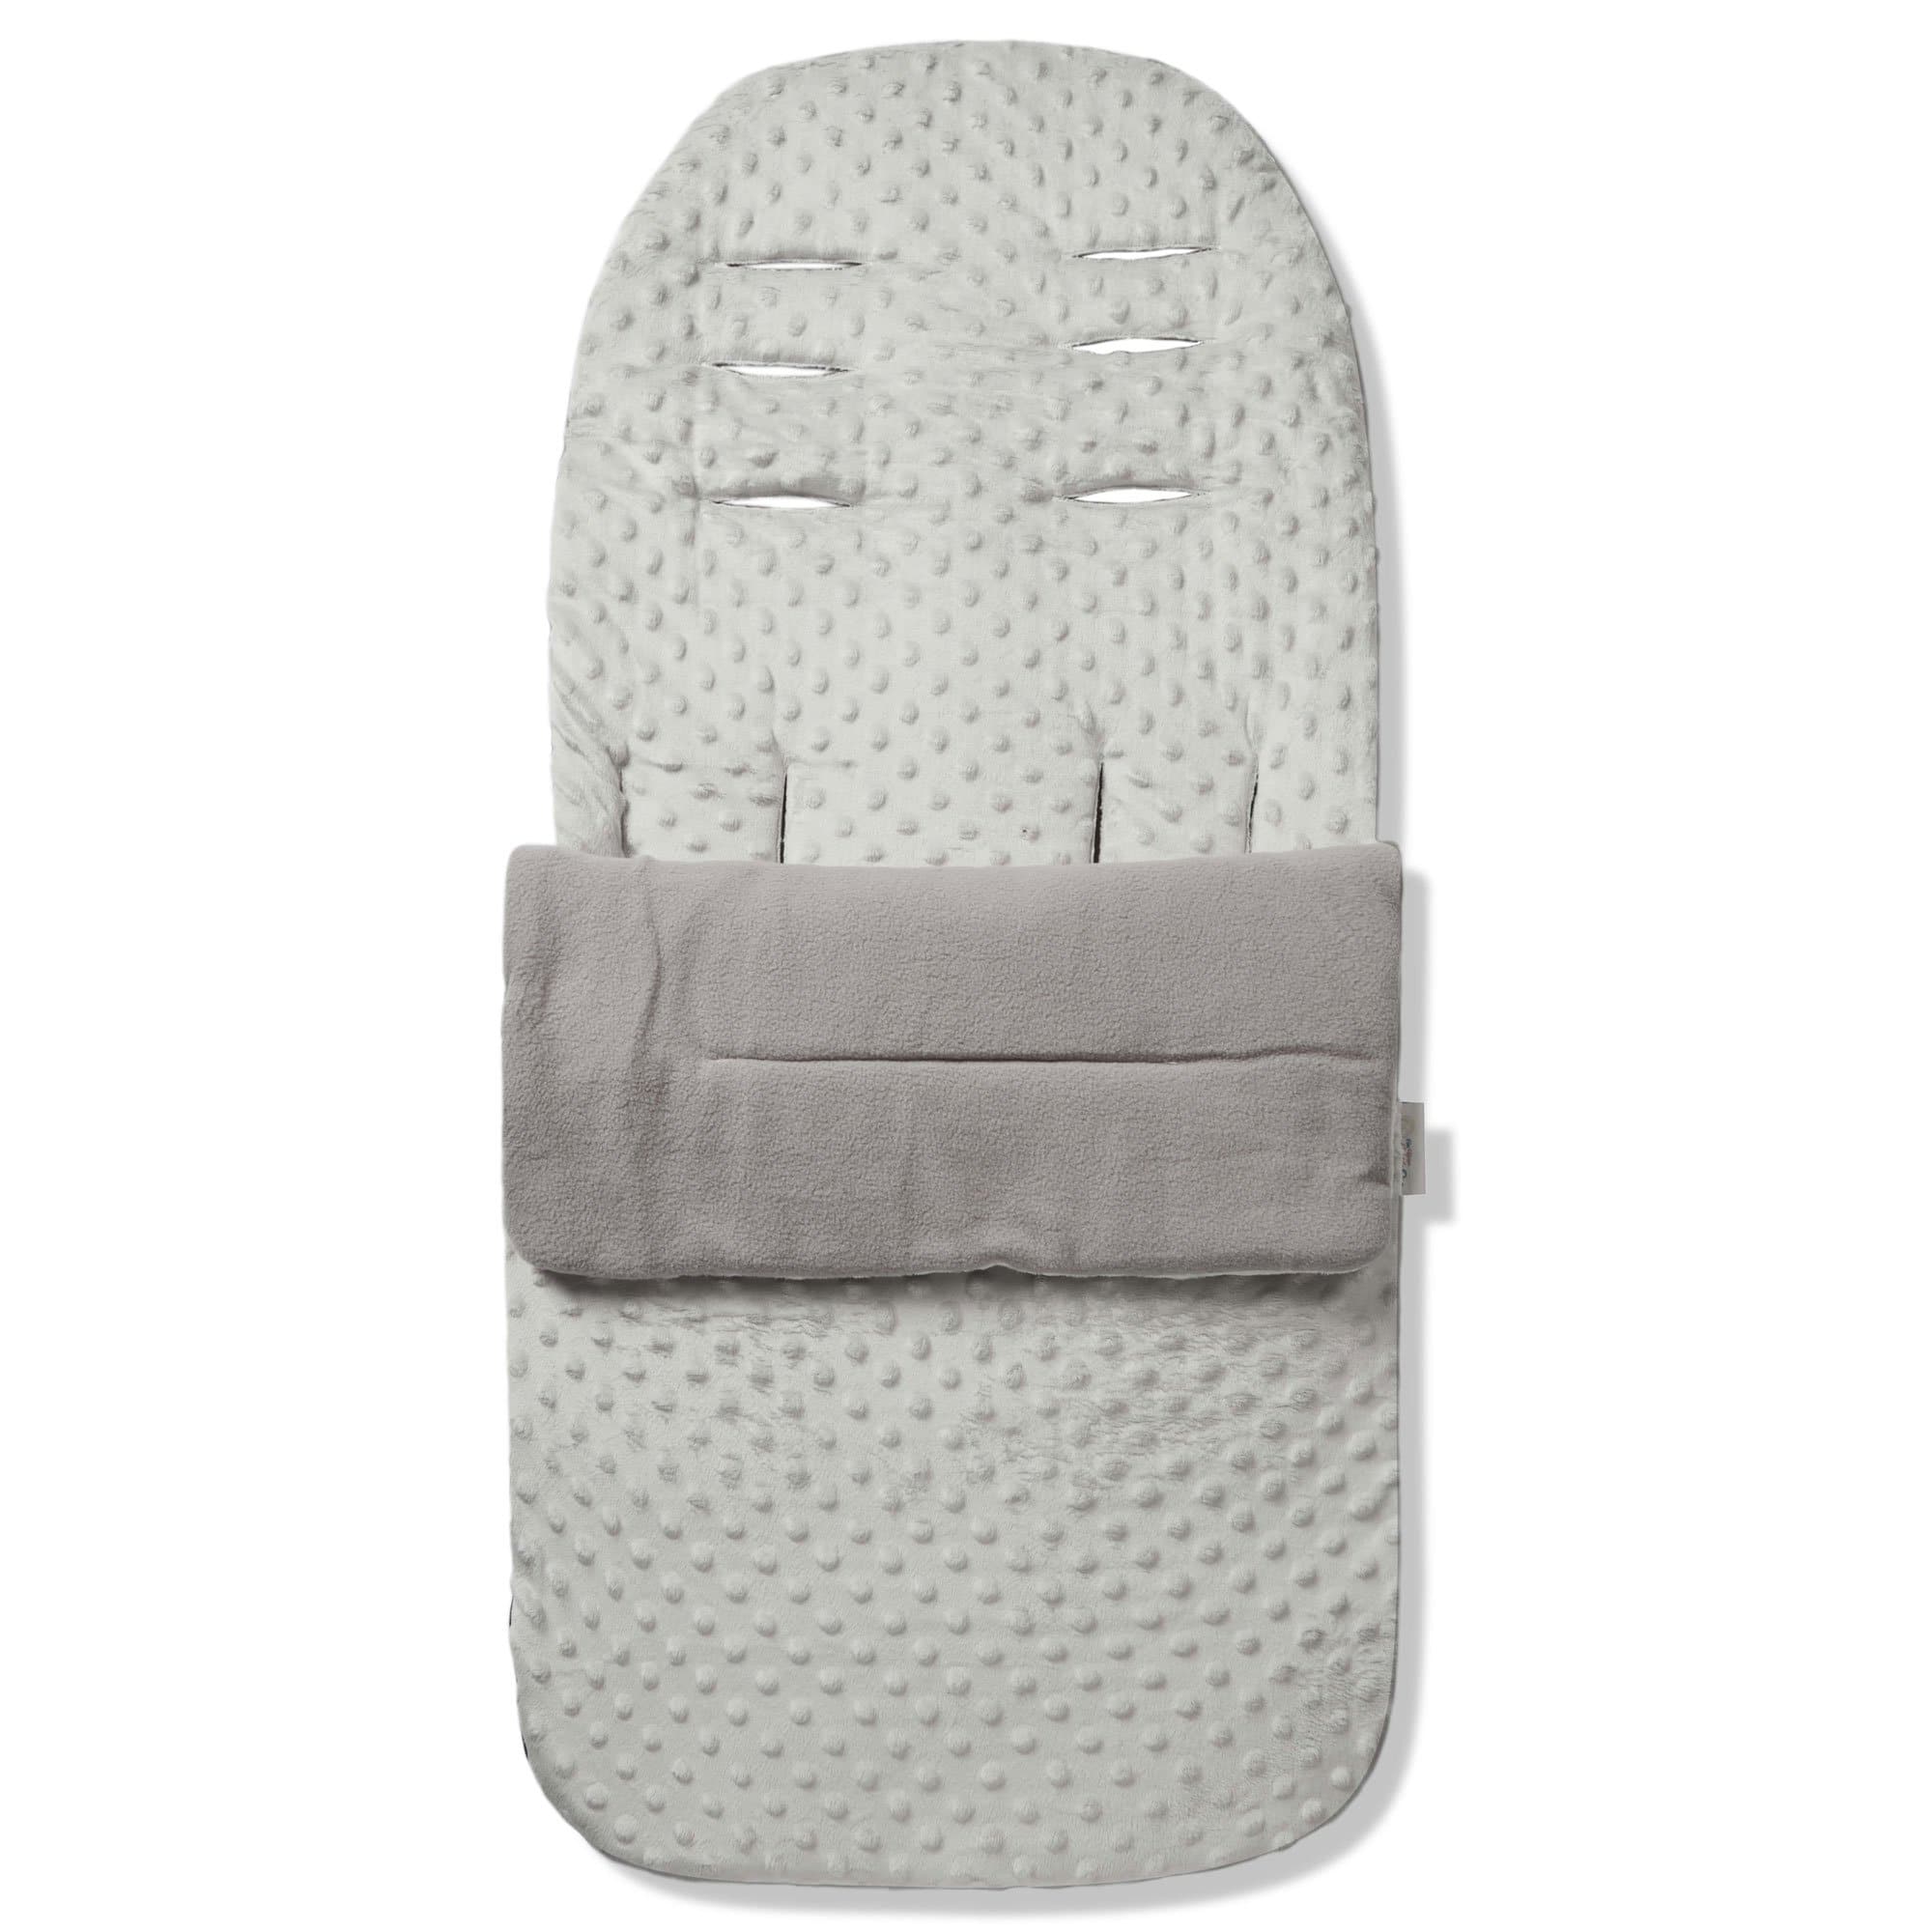 Dimple Footmuff / Cosy Toes Compatible with Inglesina - For Your Little One